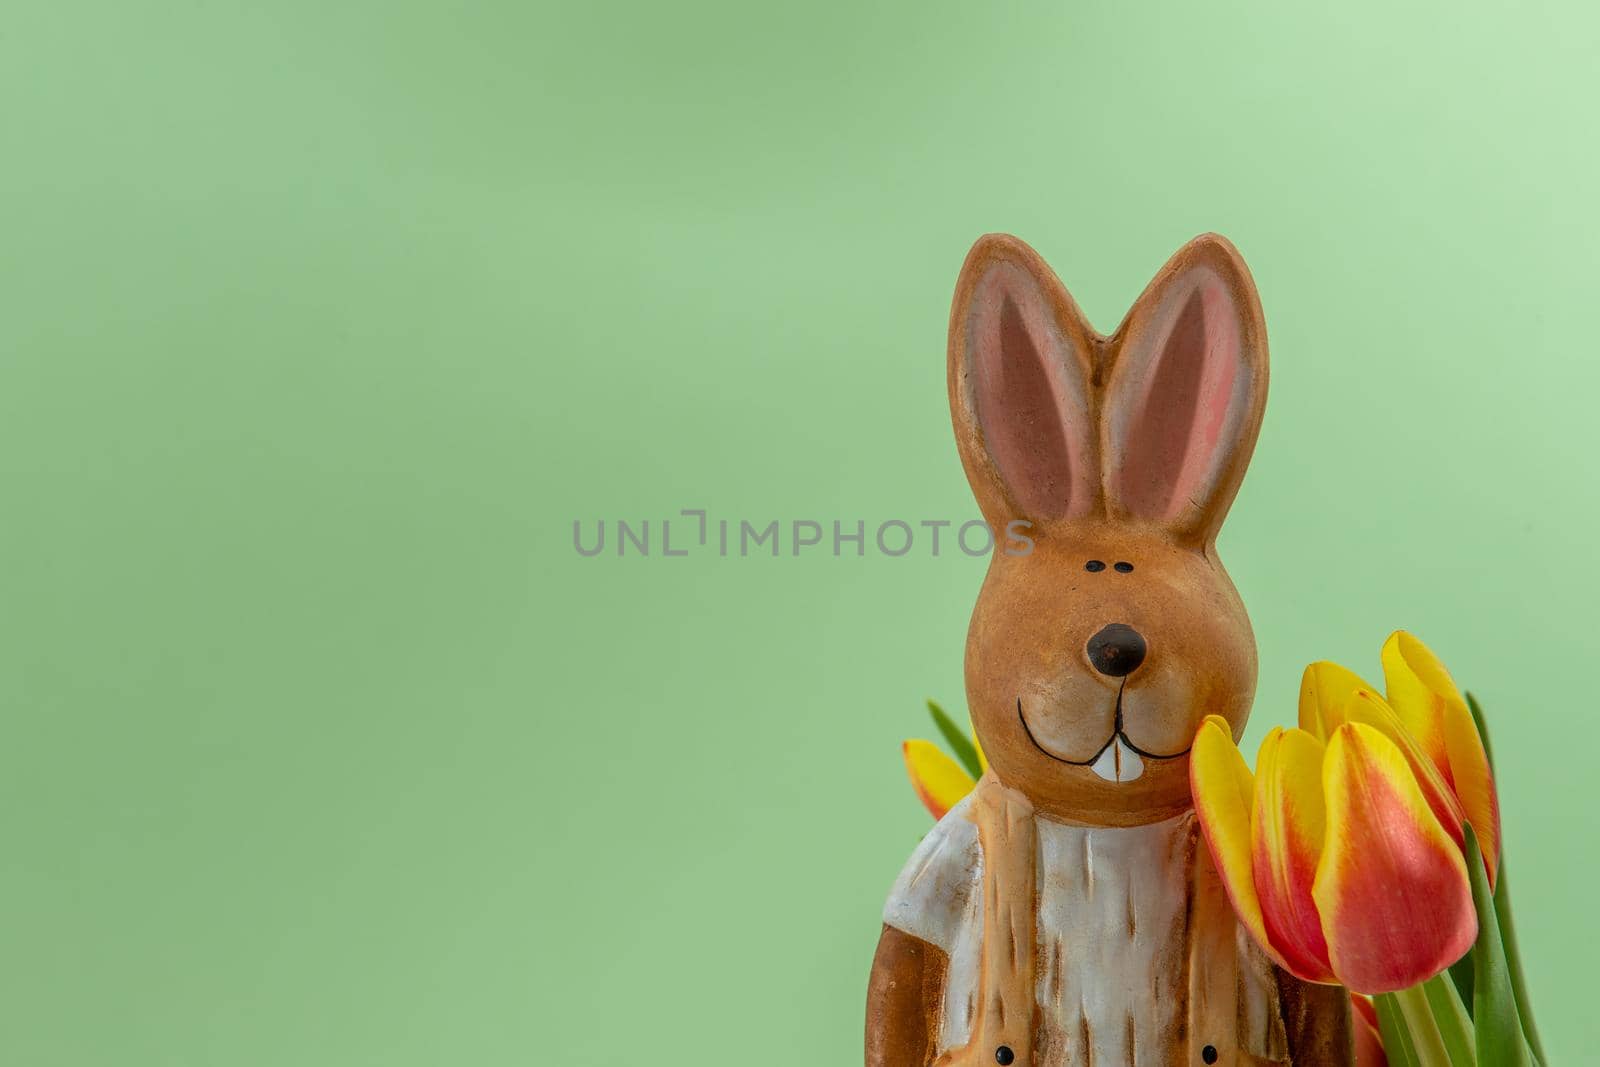 Porcelain easter bunny with yellow red tulip flowers against a light green background